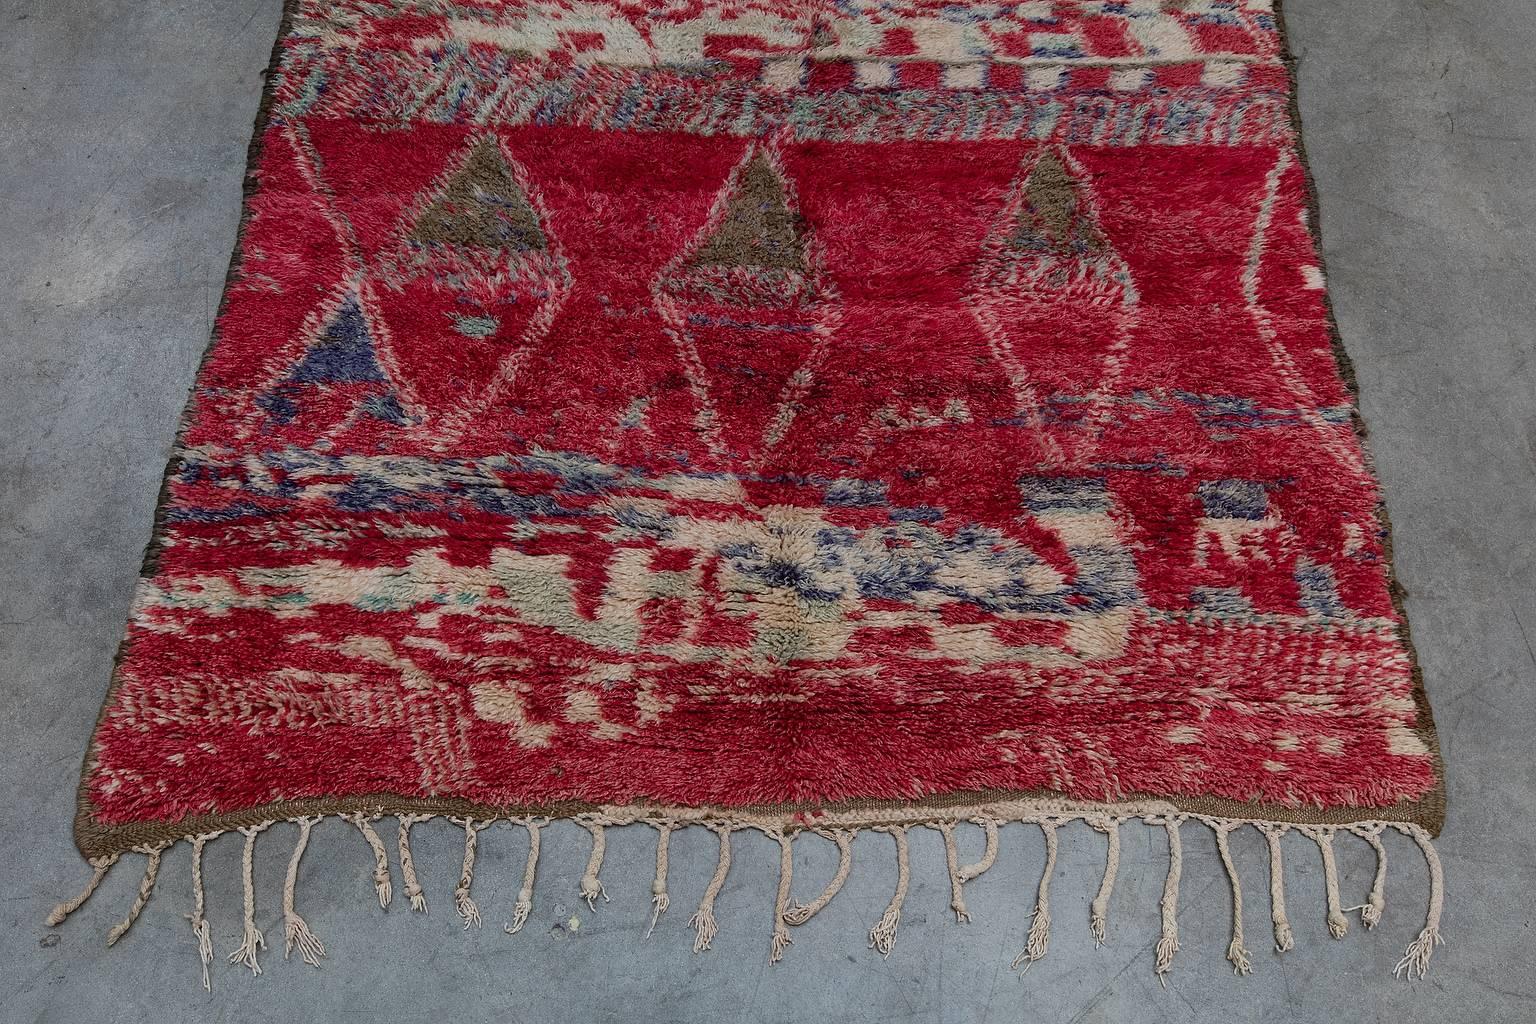 The Beni M'Guild tribe yields from the middle atlas region of Morocco. Their rugs tend to be very plush, woven to provide warmth and comfort during the winter months. Beni M'Guild rugs feature a well-known composition of diamonds in the